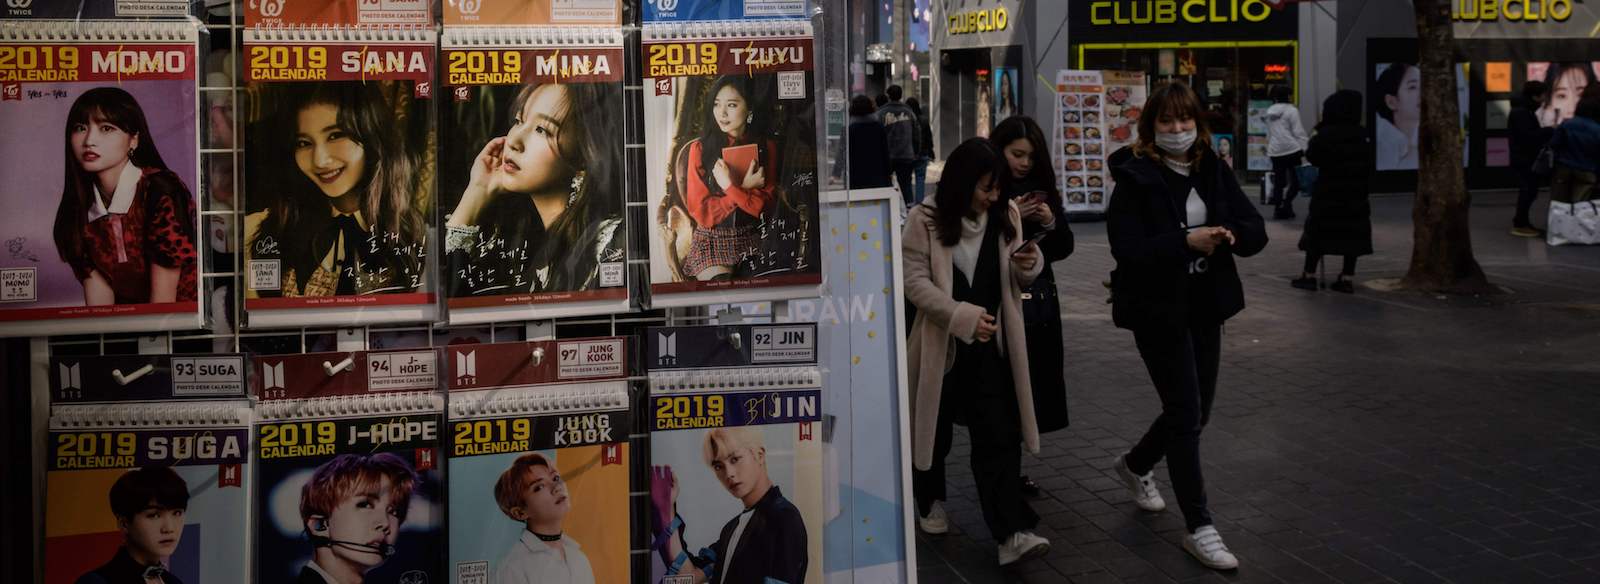 Sex Sleping Rap - The K-Pop sex and drugs scandal sweeping South Korea | Lowy Institute